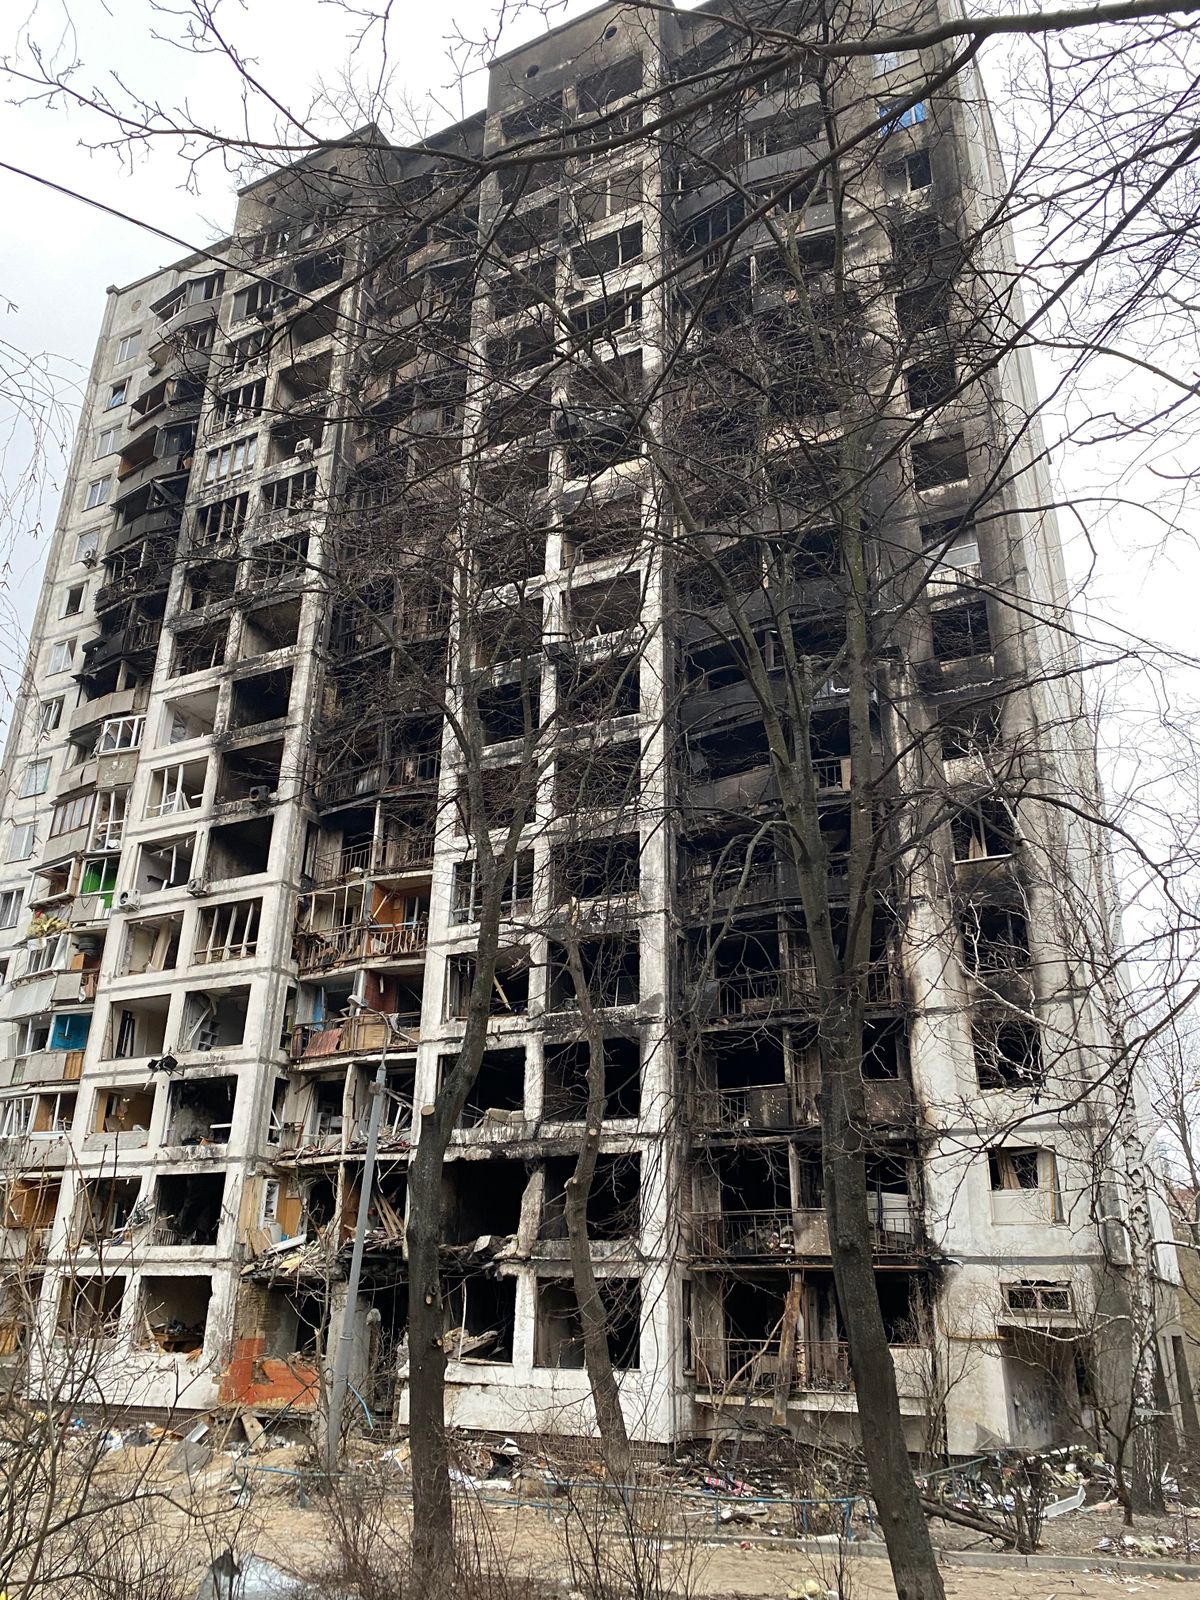 A destroyed apartment building in Kyiv, Ukraine as seen on March 26, 2022.  (Courtesy of Jared Malone)